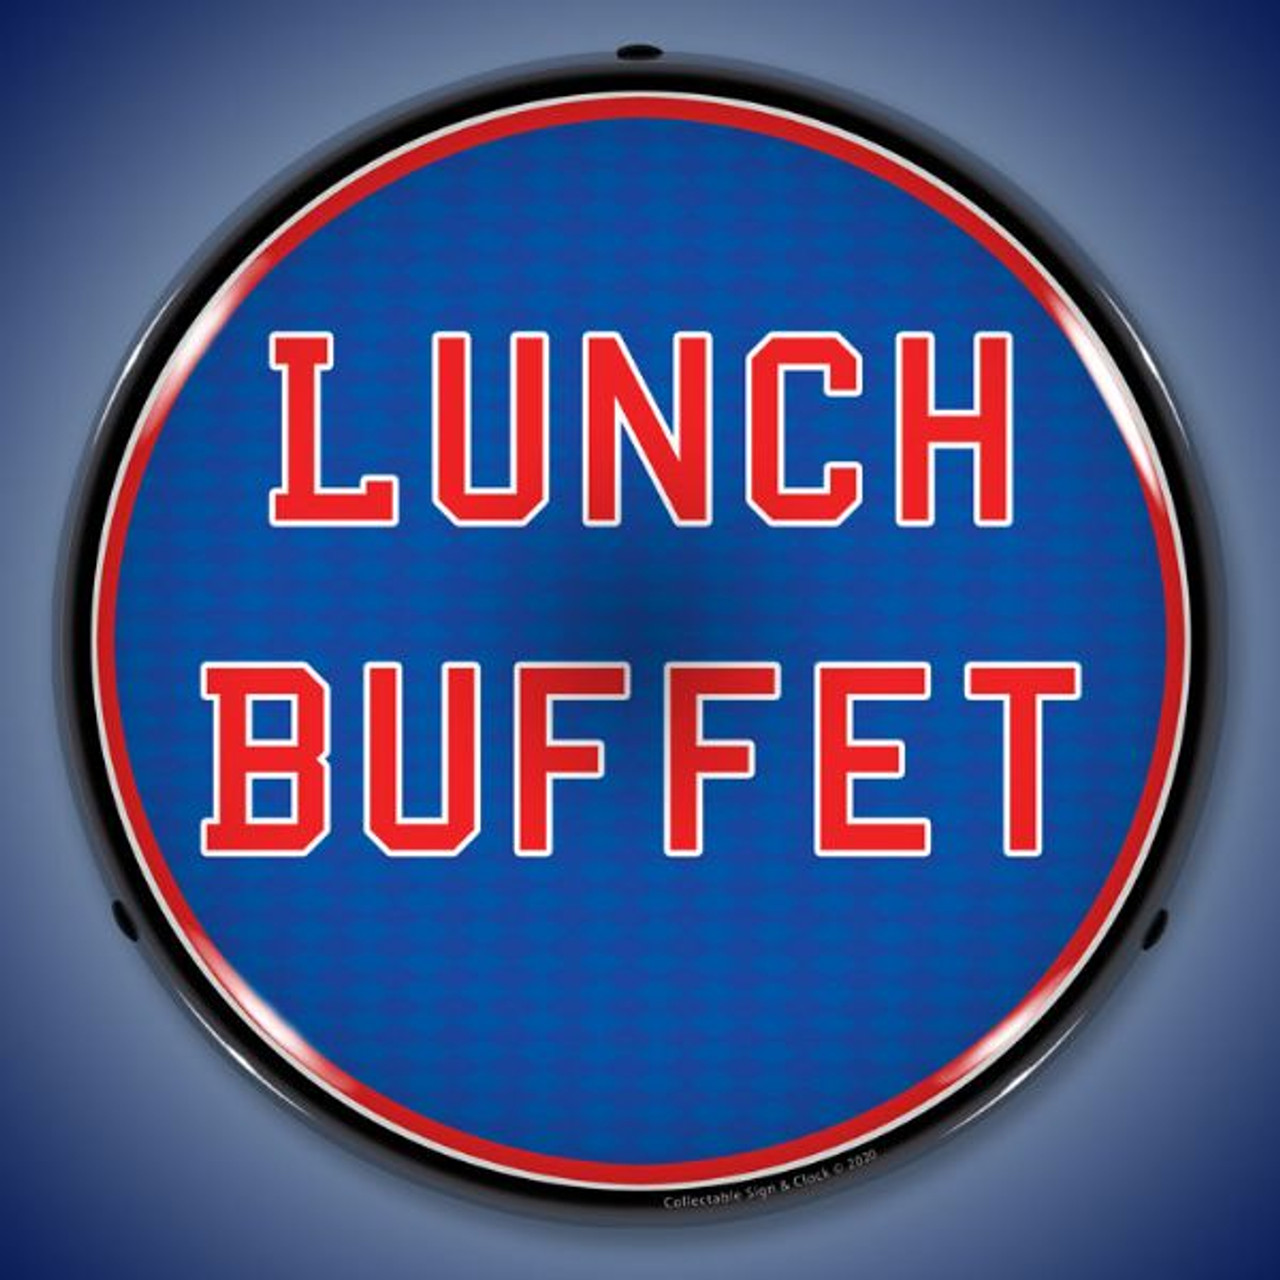 Lunch Buffet LED Lighted Business Sign 14 x 14 Inches